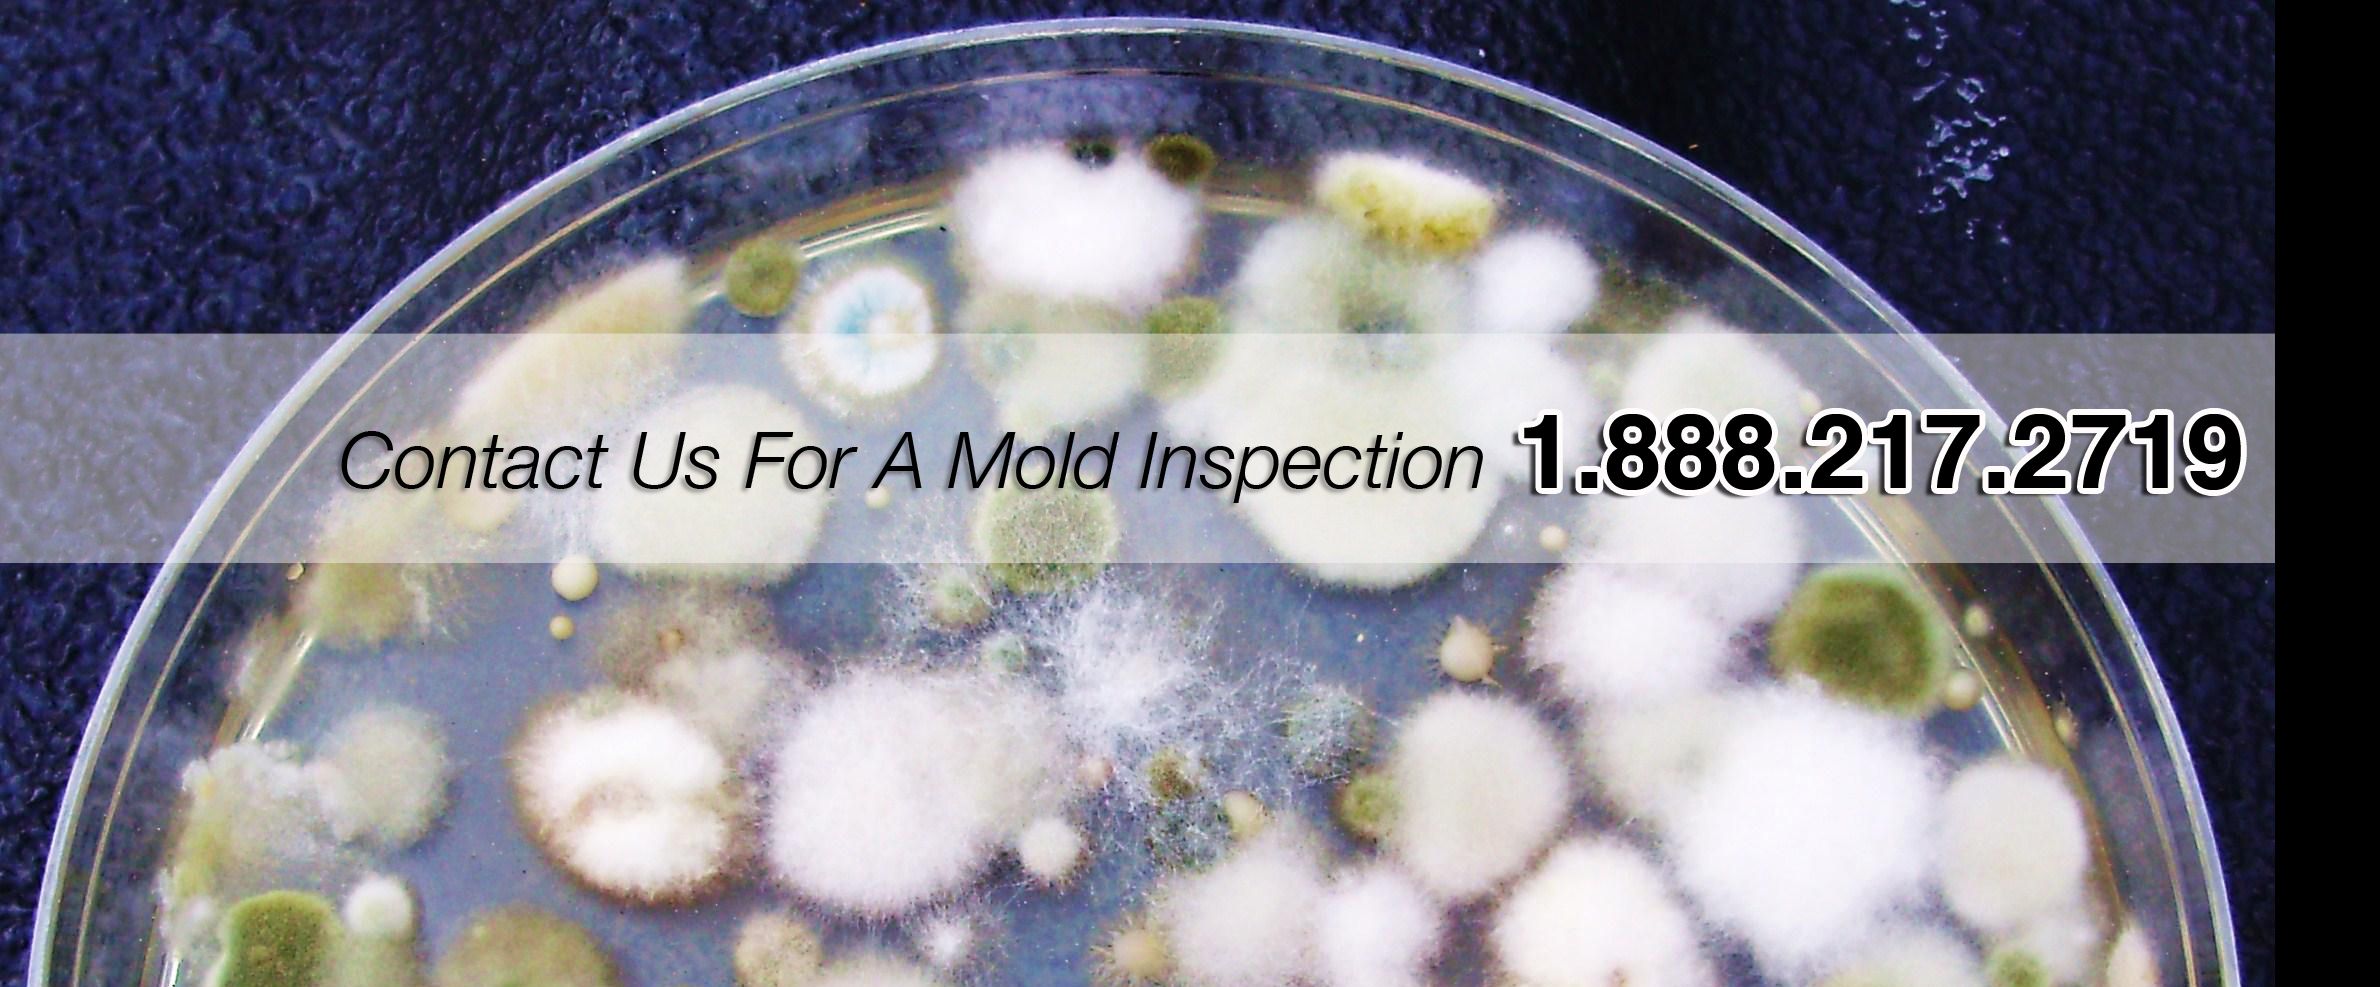 Contact Commercial Indoor Air Quality Testing, LLC for Mold Inspection